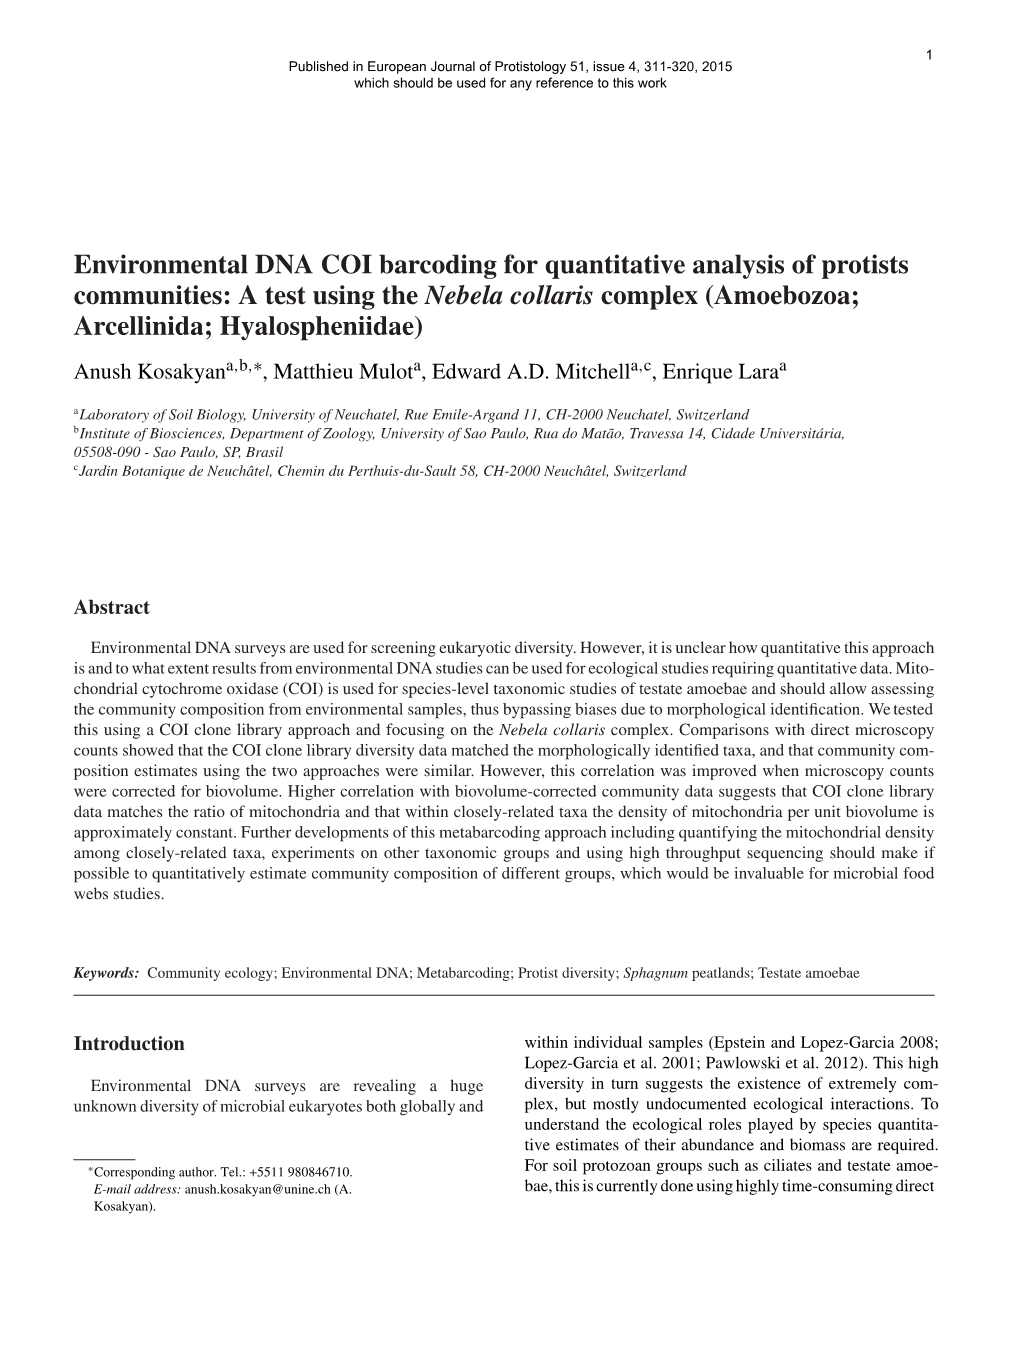 Environmental DNA COI Barcoding for Quantitative Analysis of Protists